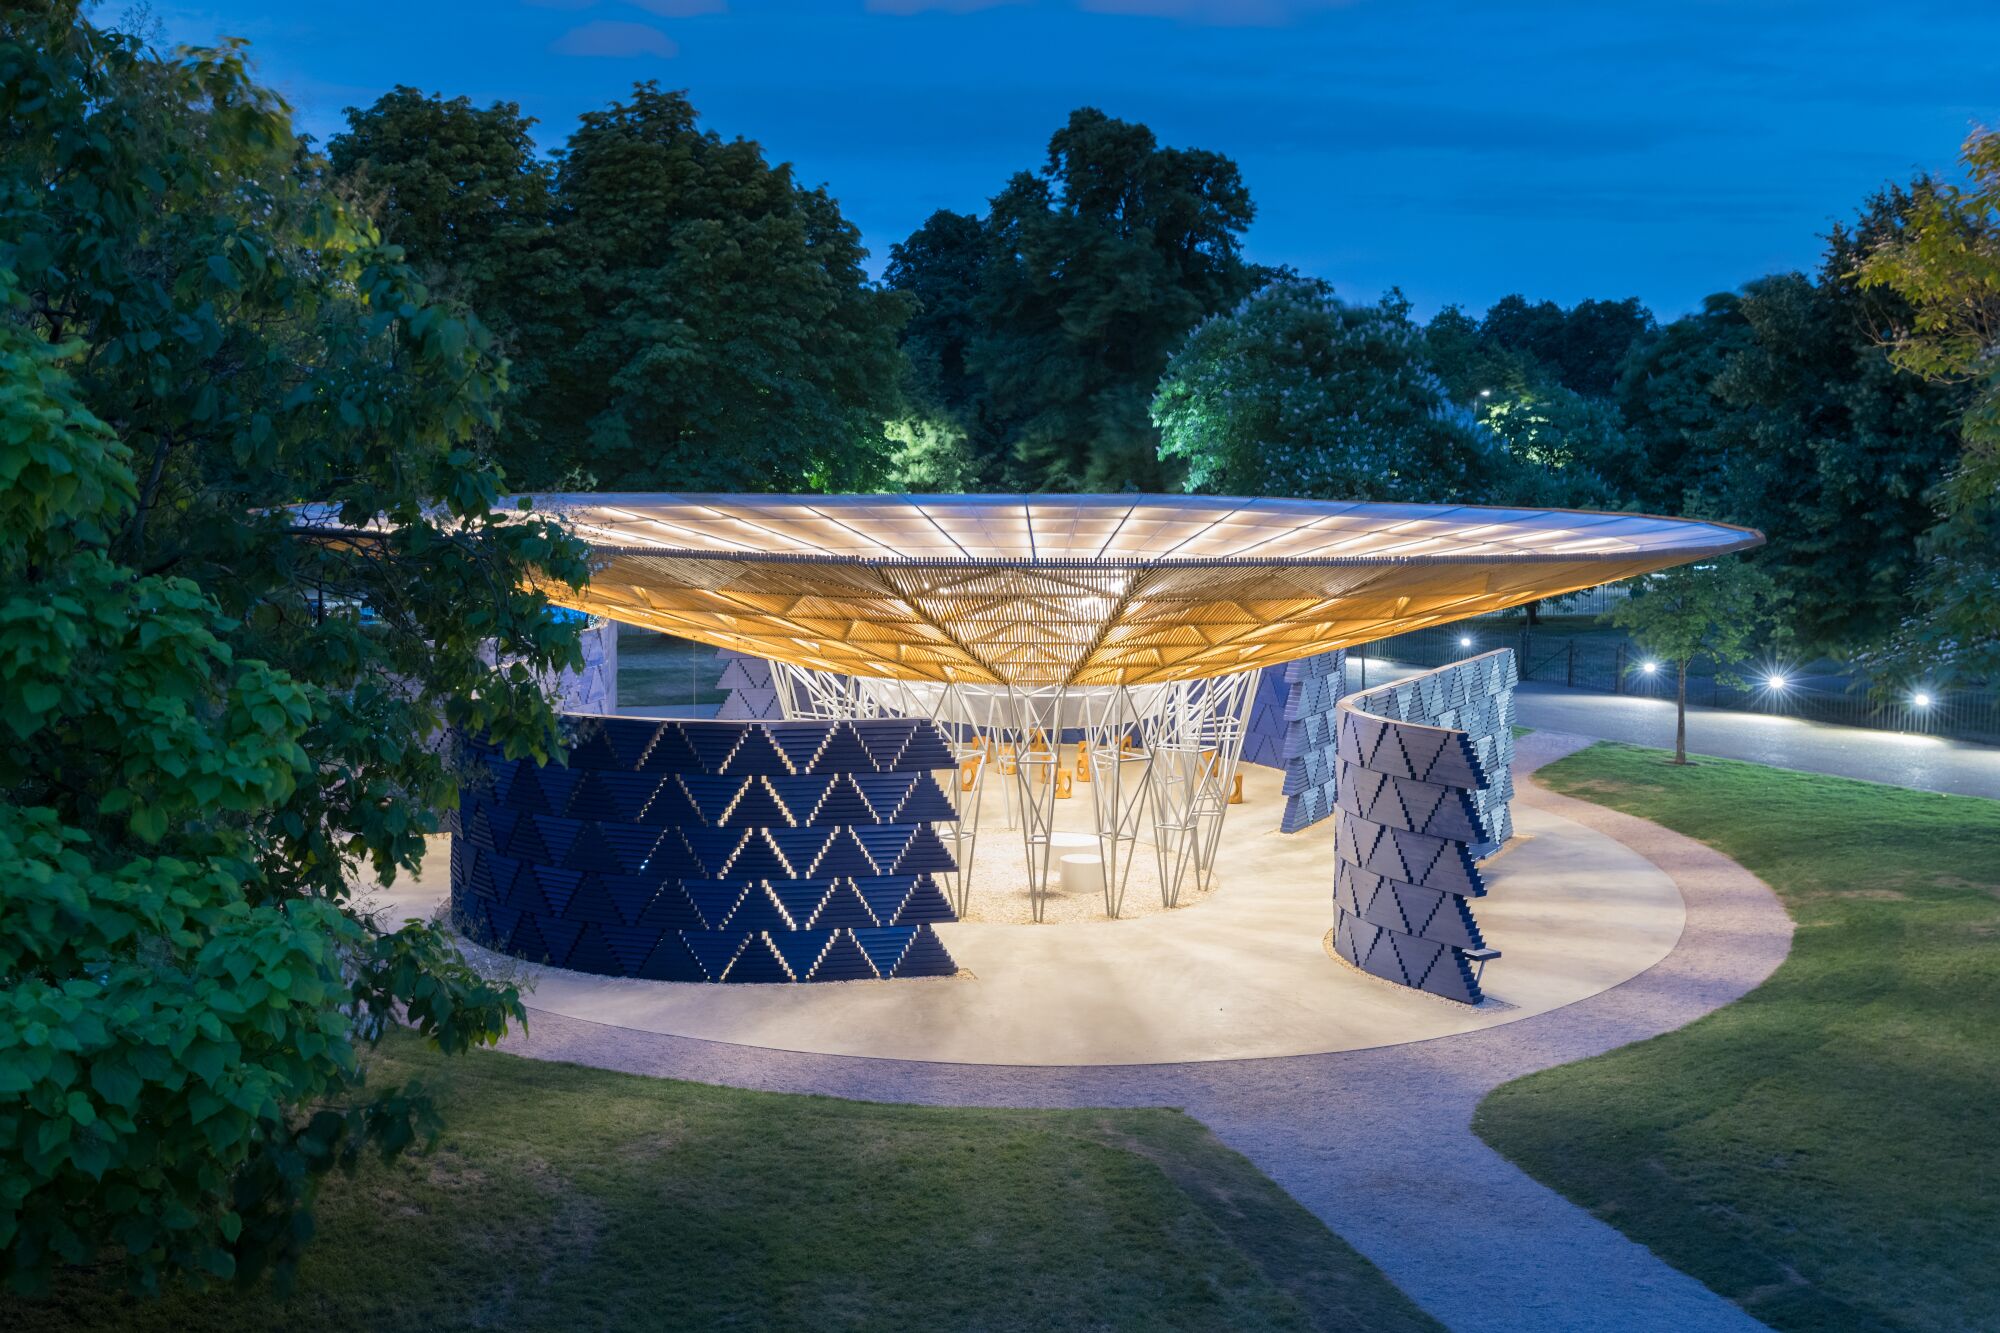 An image taken at dusk shows a pavilion with a circular roof over blue block walls punctured with a triangular pattern.